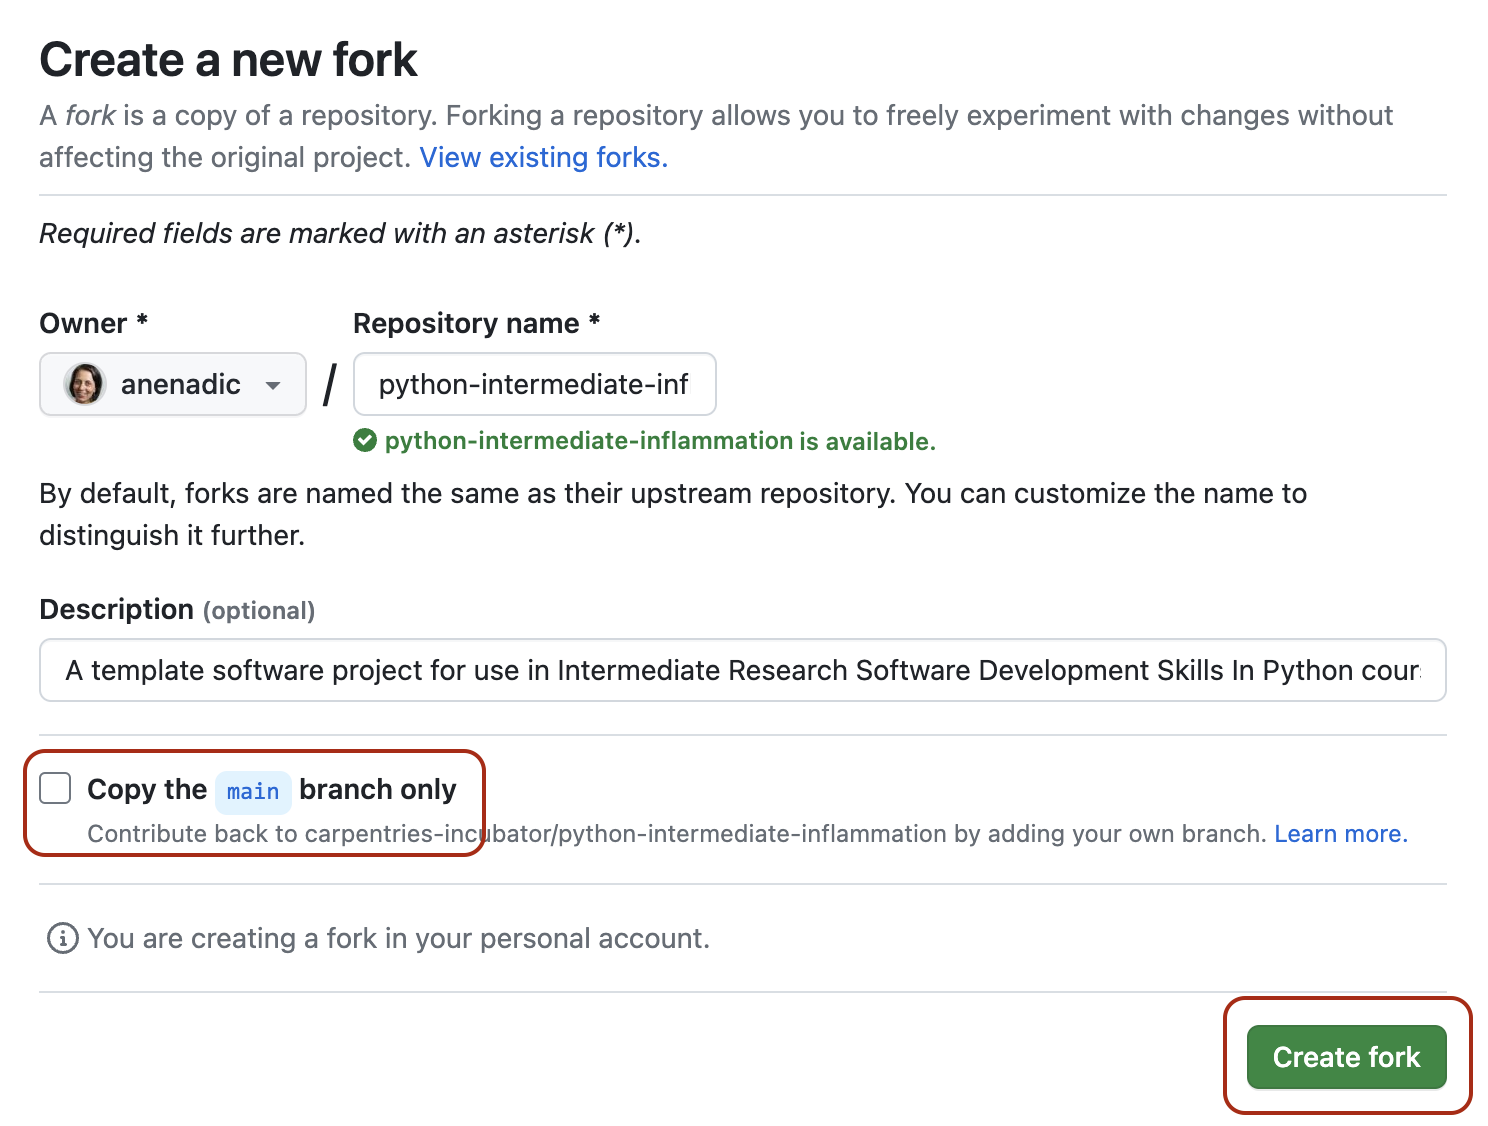 Making a fork of the software project repository in GitHub